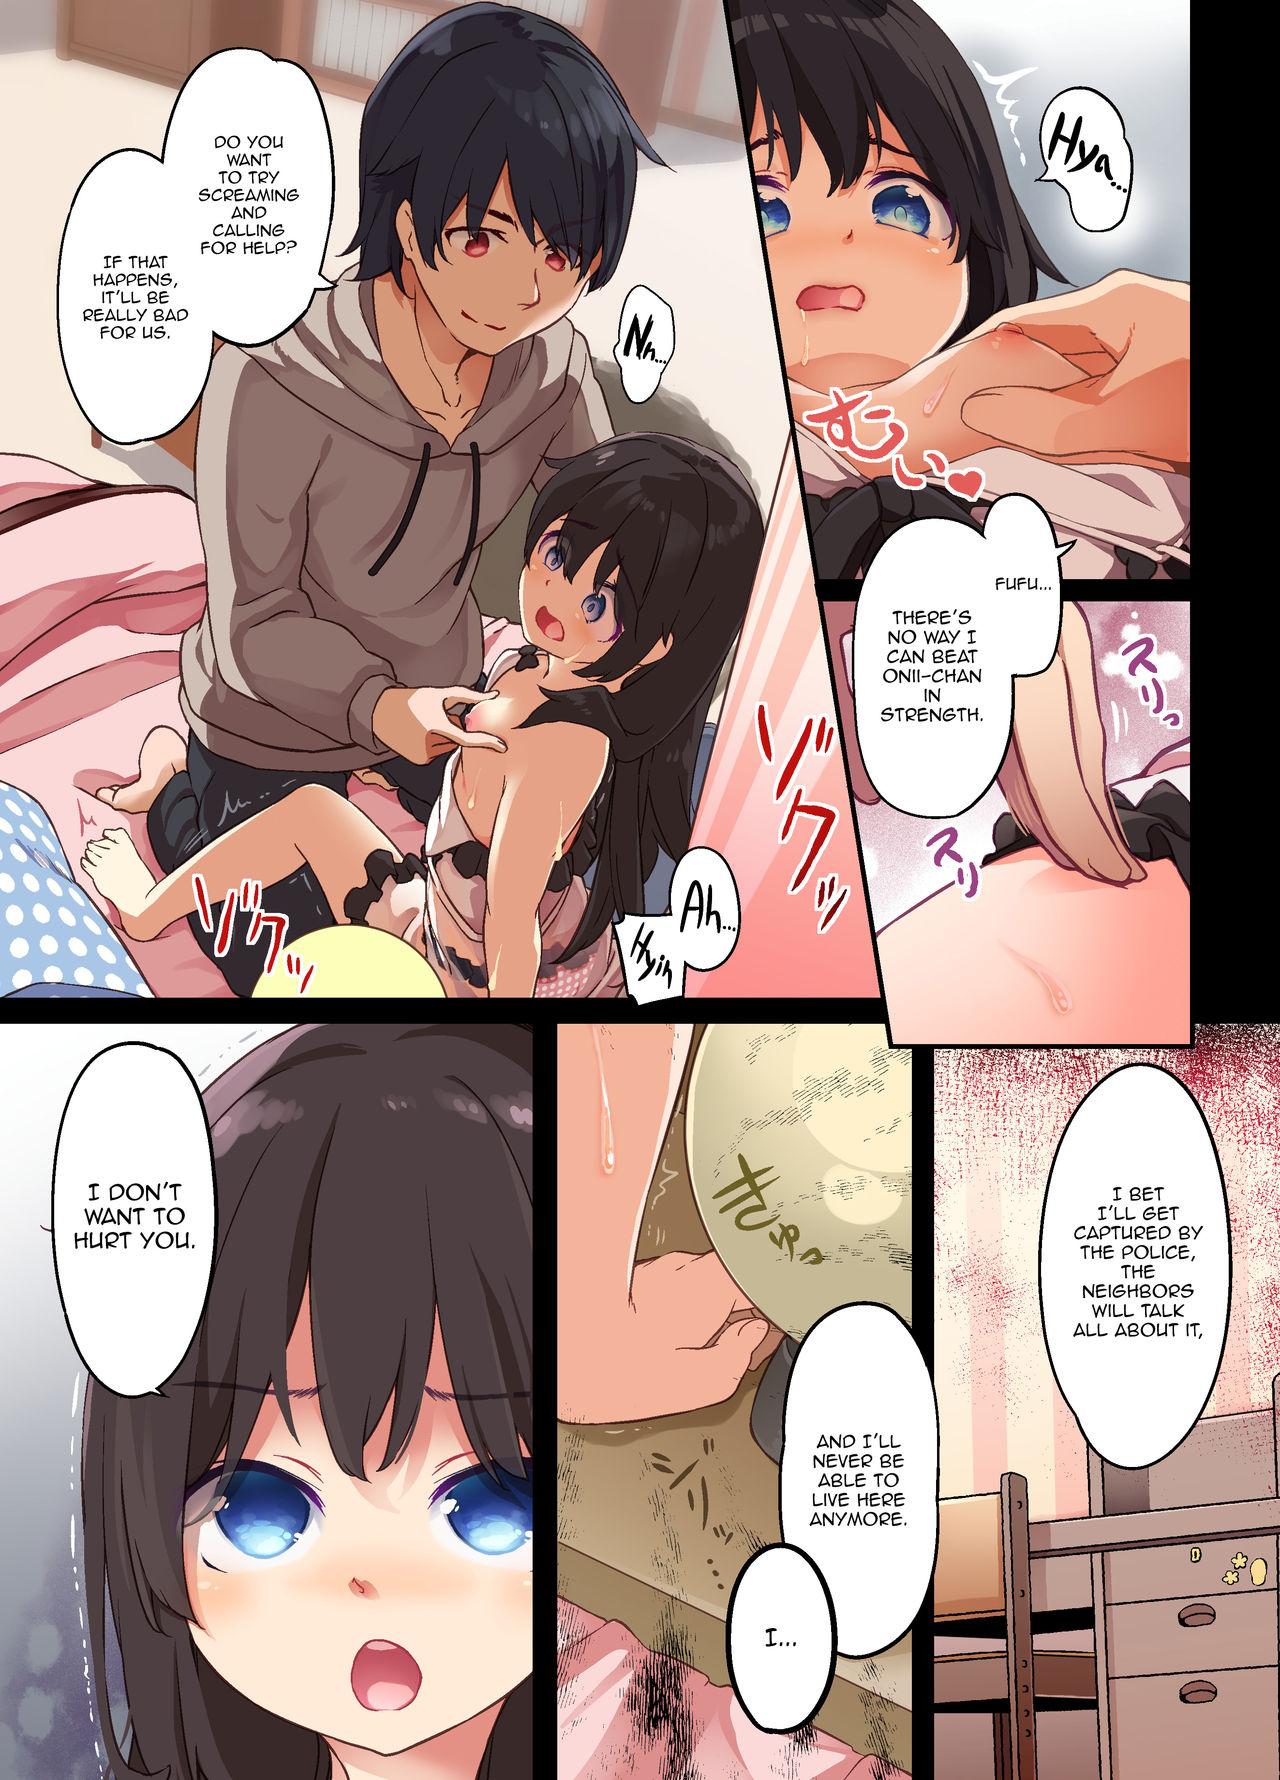 A Yandere Little Sister Wants to Be Impregnated by Her Big Brother, So She Switches Bodies With Him and They Have Baby-Making Sex 14